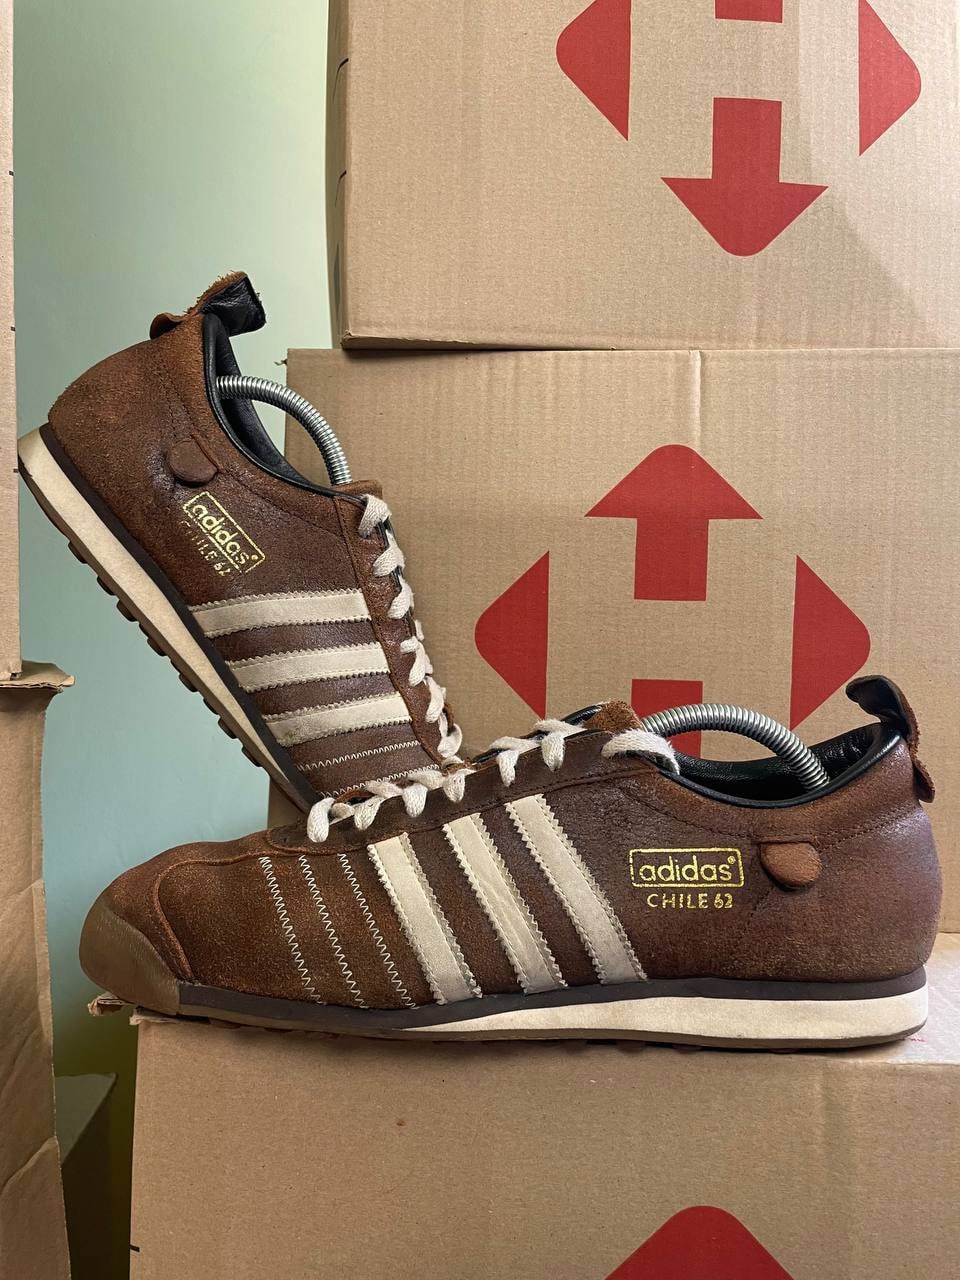 Ritual Hængsel Modtager Rare Adidas Chile 62 Mens Trainers Leather Brown Shoes UK 10 - Etsy New  Zealand